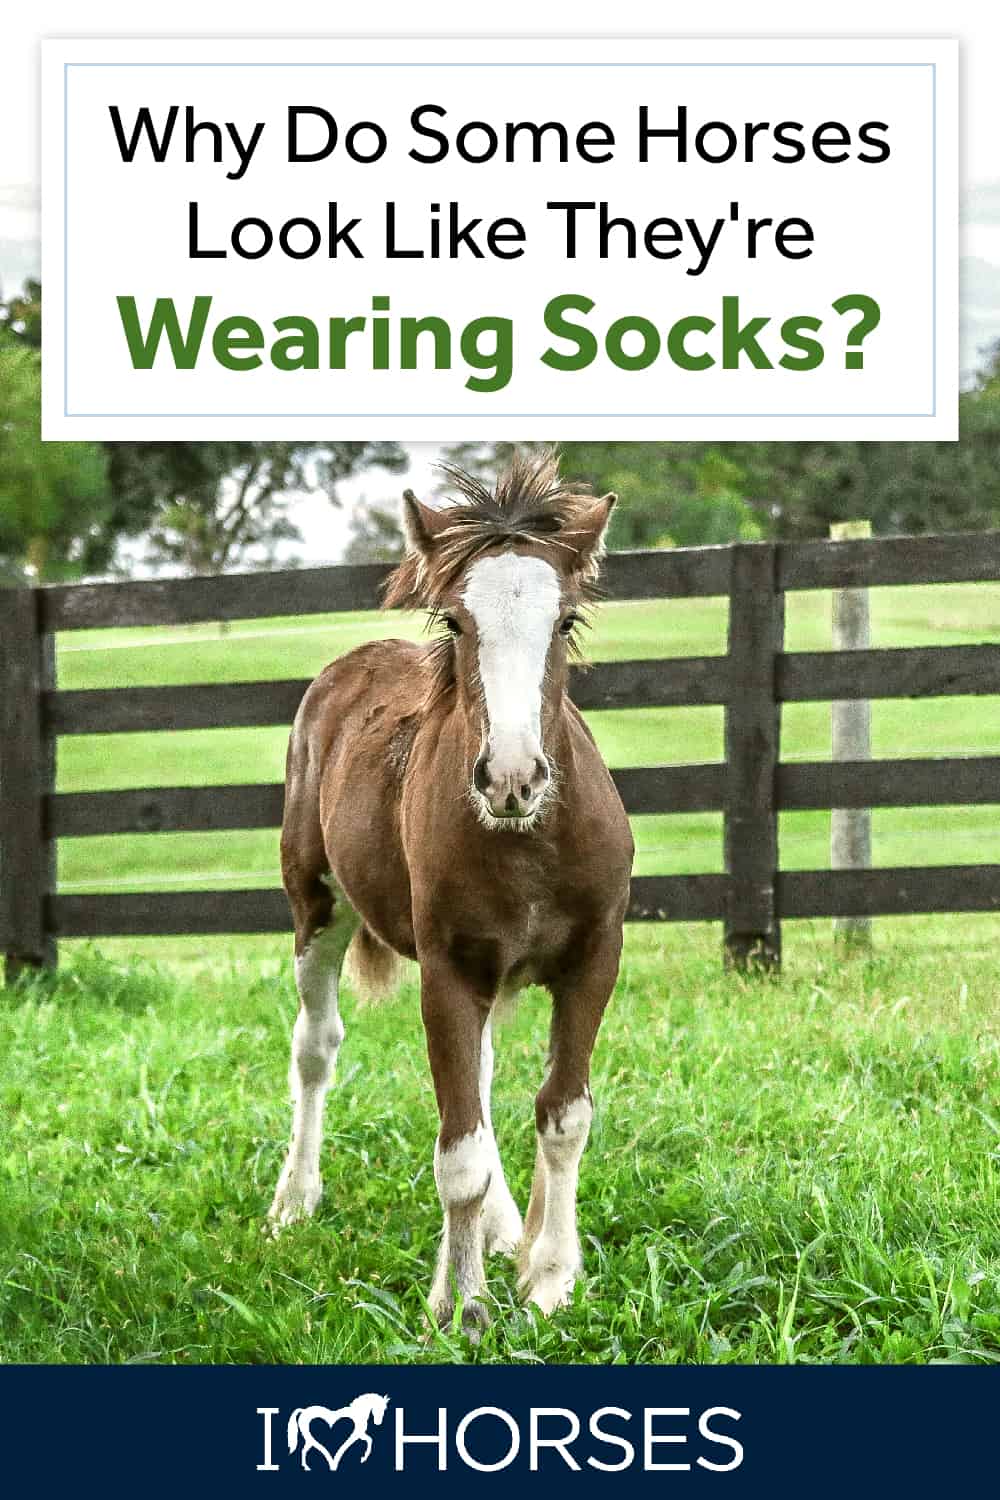 Why Do Some Horses Look Like They're Wearing Socks